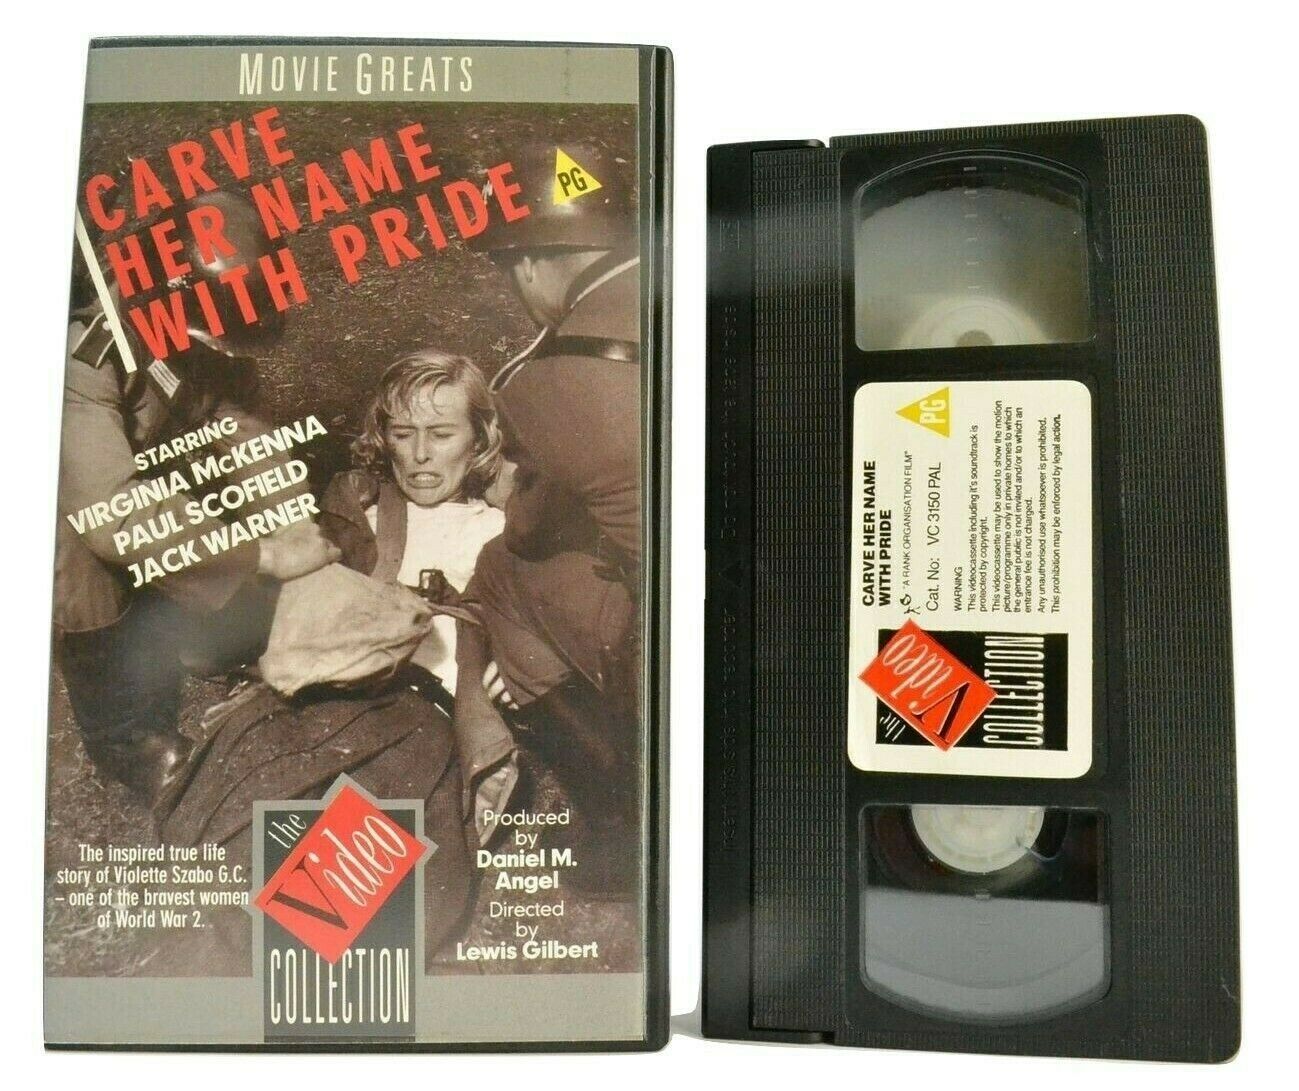 Carve Her Name With Pride (1958): Biographical Drama - Virginia McKenna - VHS-